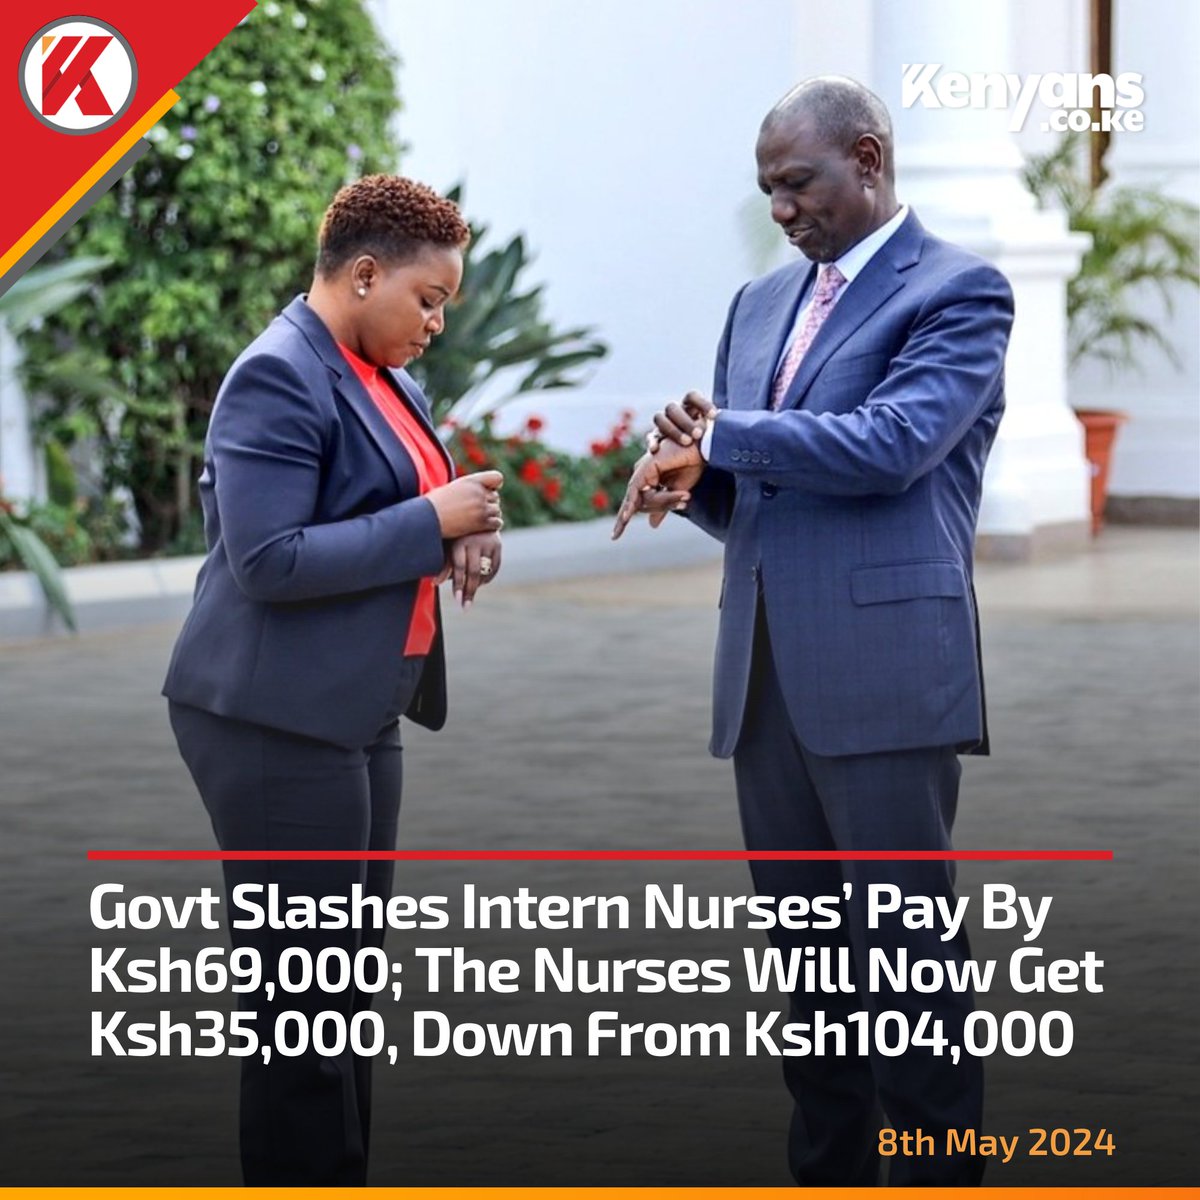 If we can slash the salaries of nurses by this much, can we also have a discussion on slashing the salaries of our useless MPs?